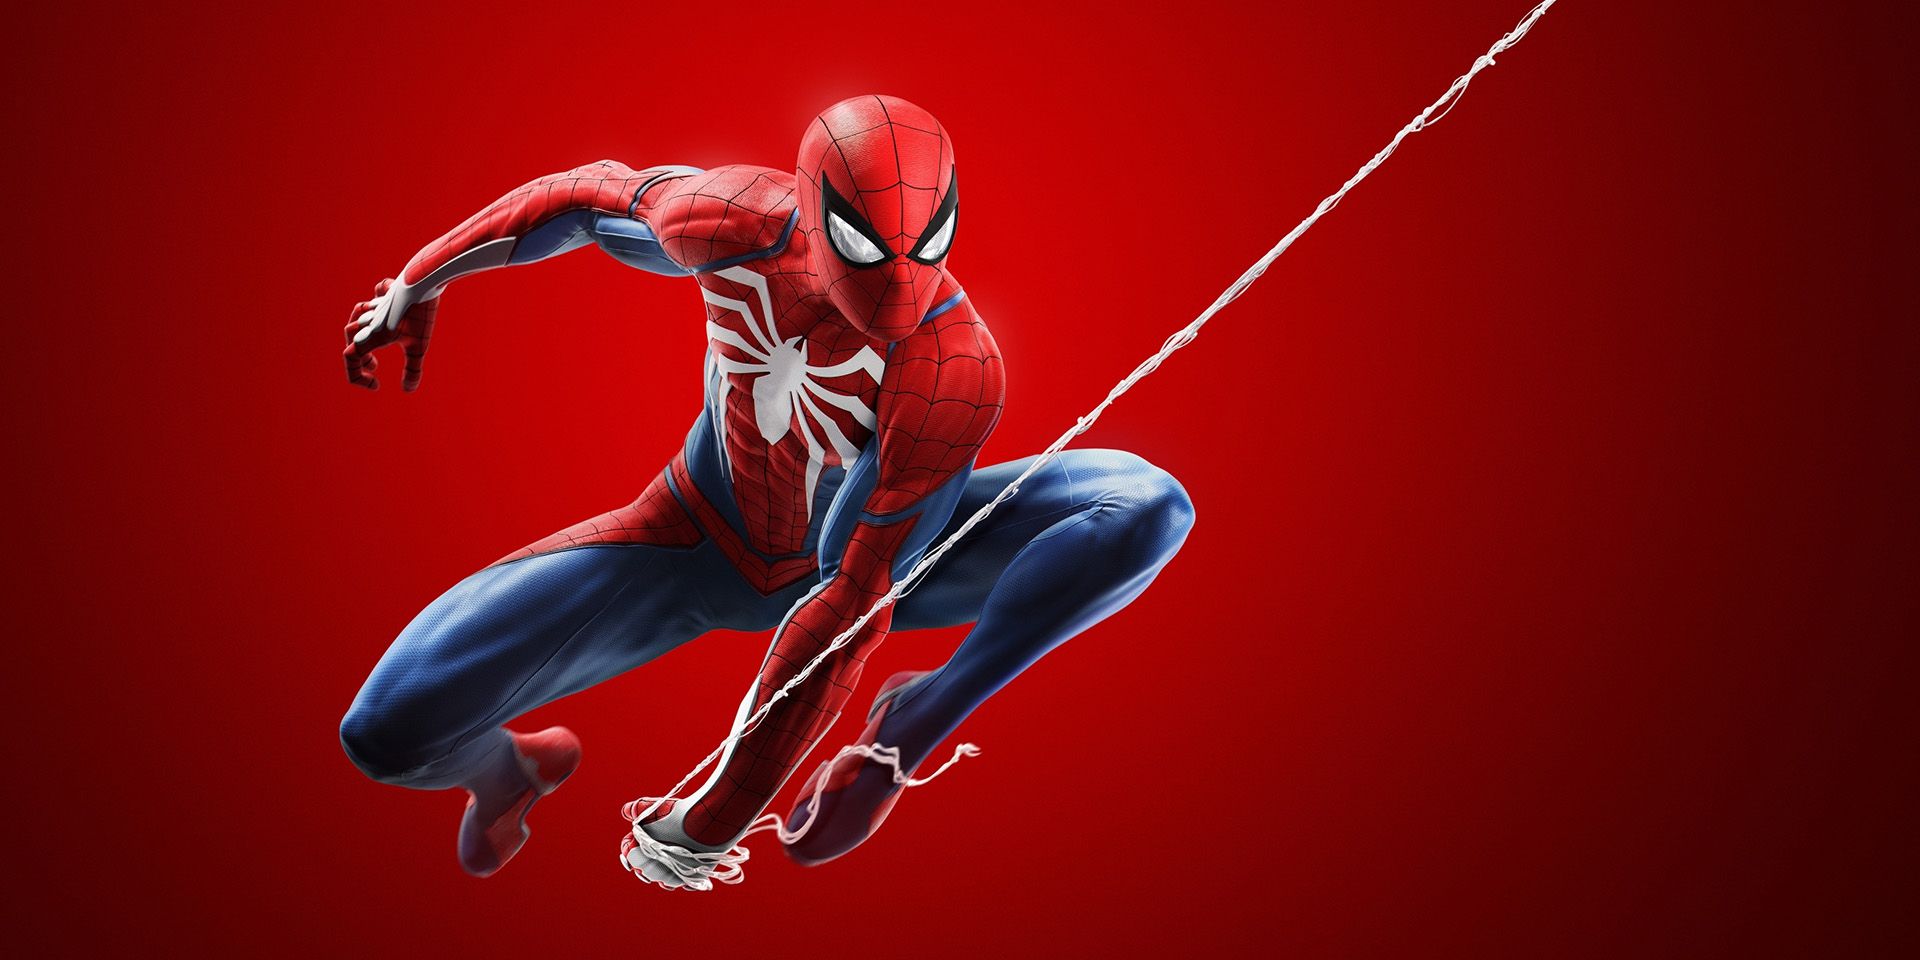 Two Spider-Man Spinoff Movies Are Coming in 2020